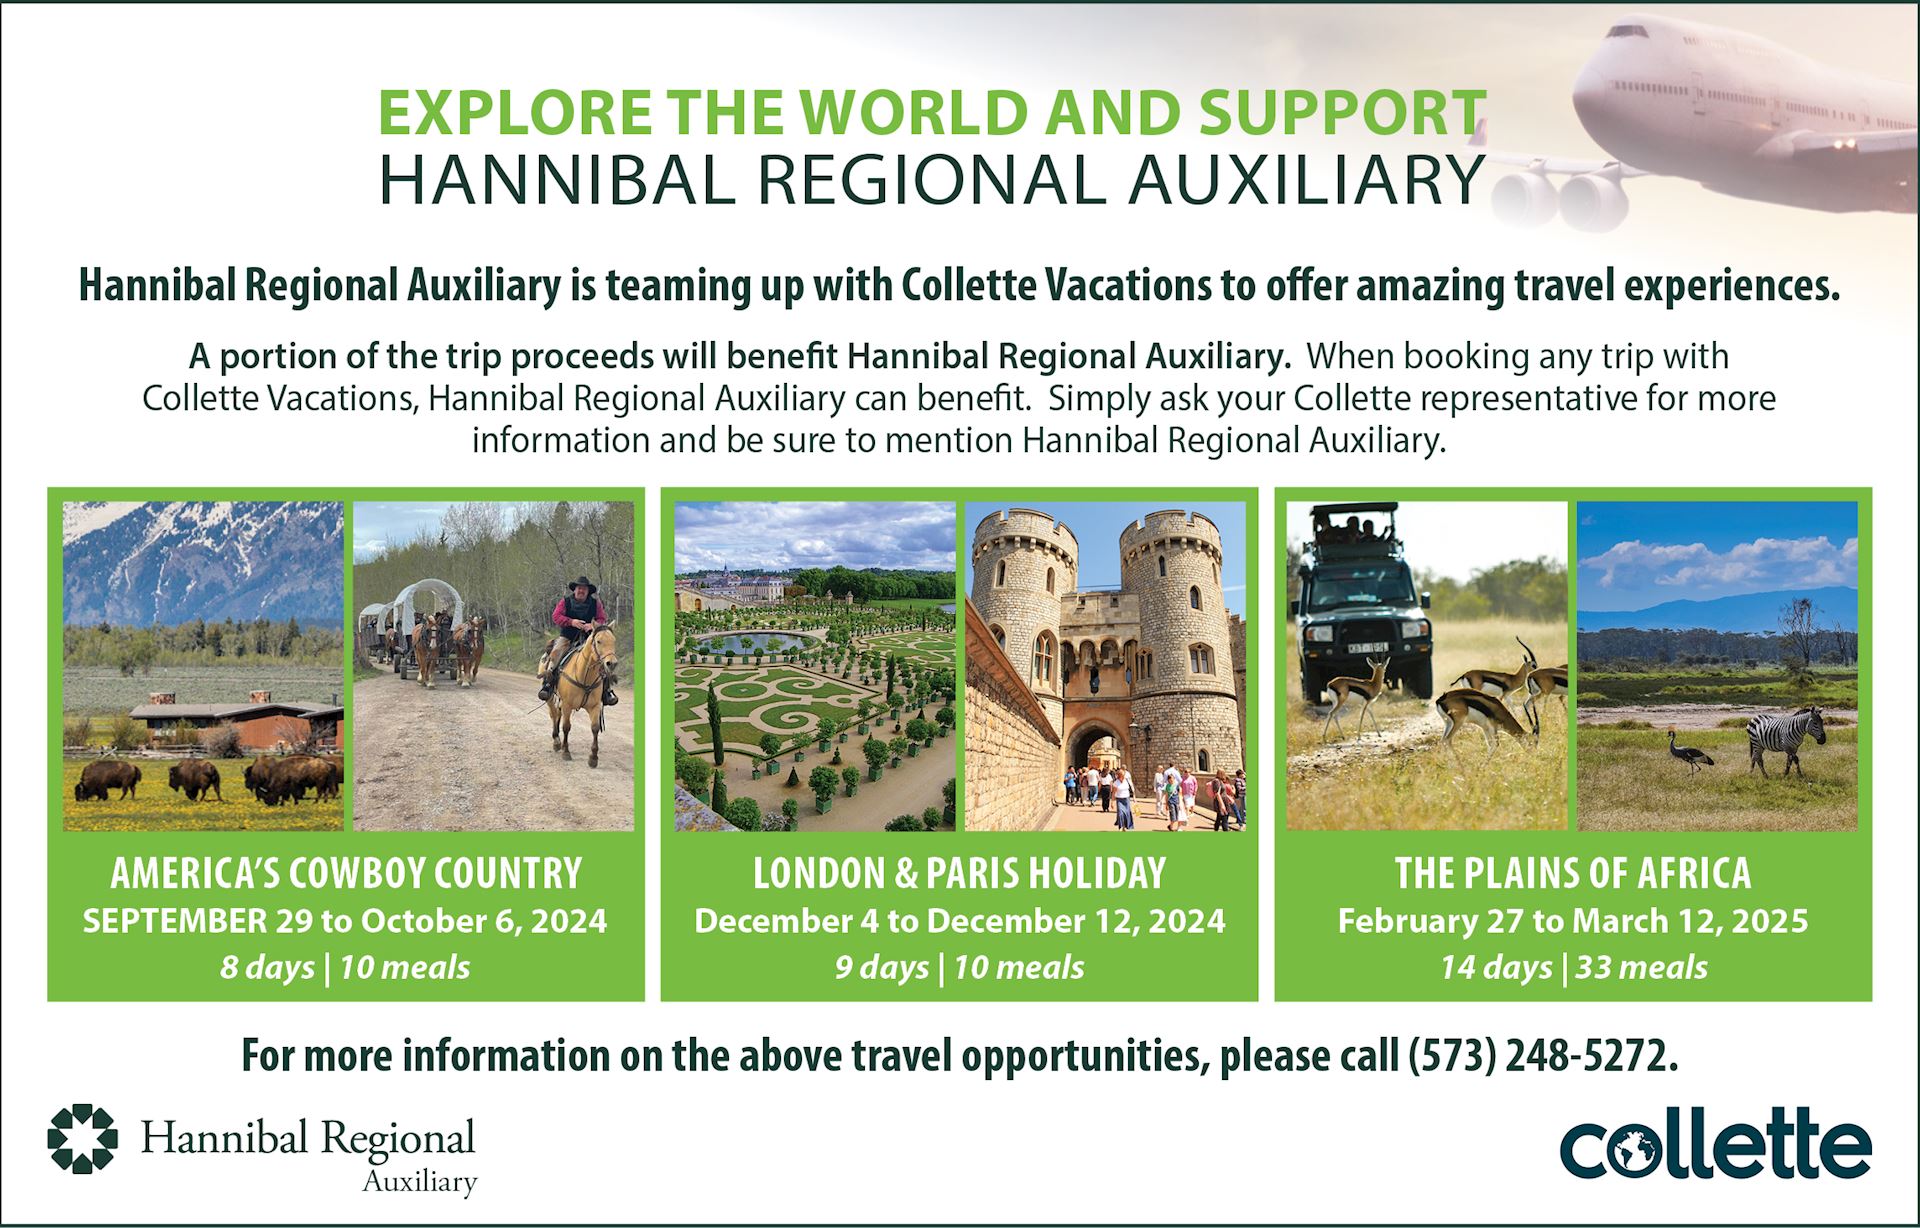 Explore the World and Support Hannibal Regional Auxiliary. Contact us for details.